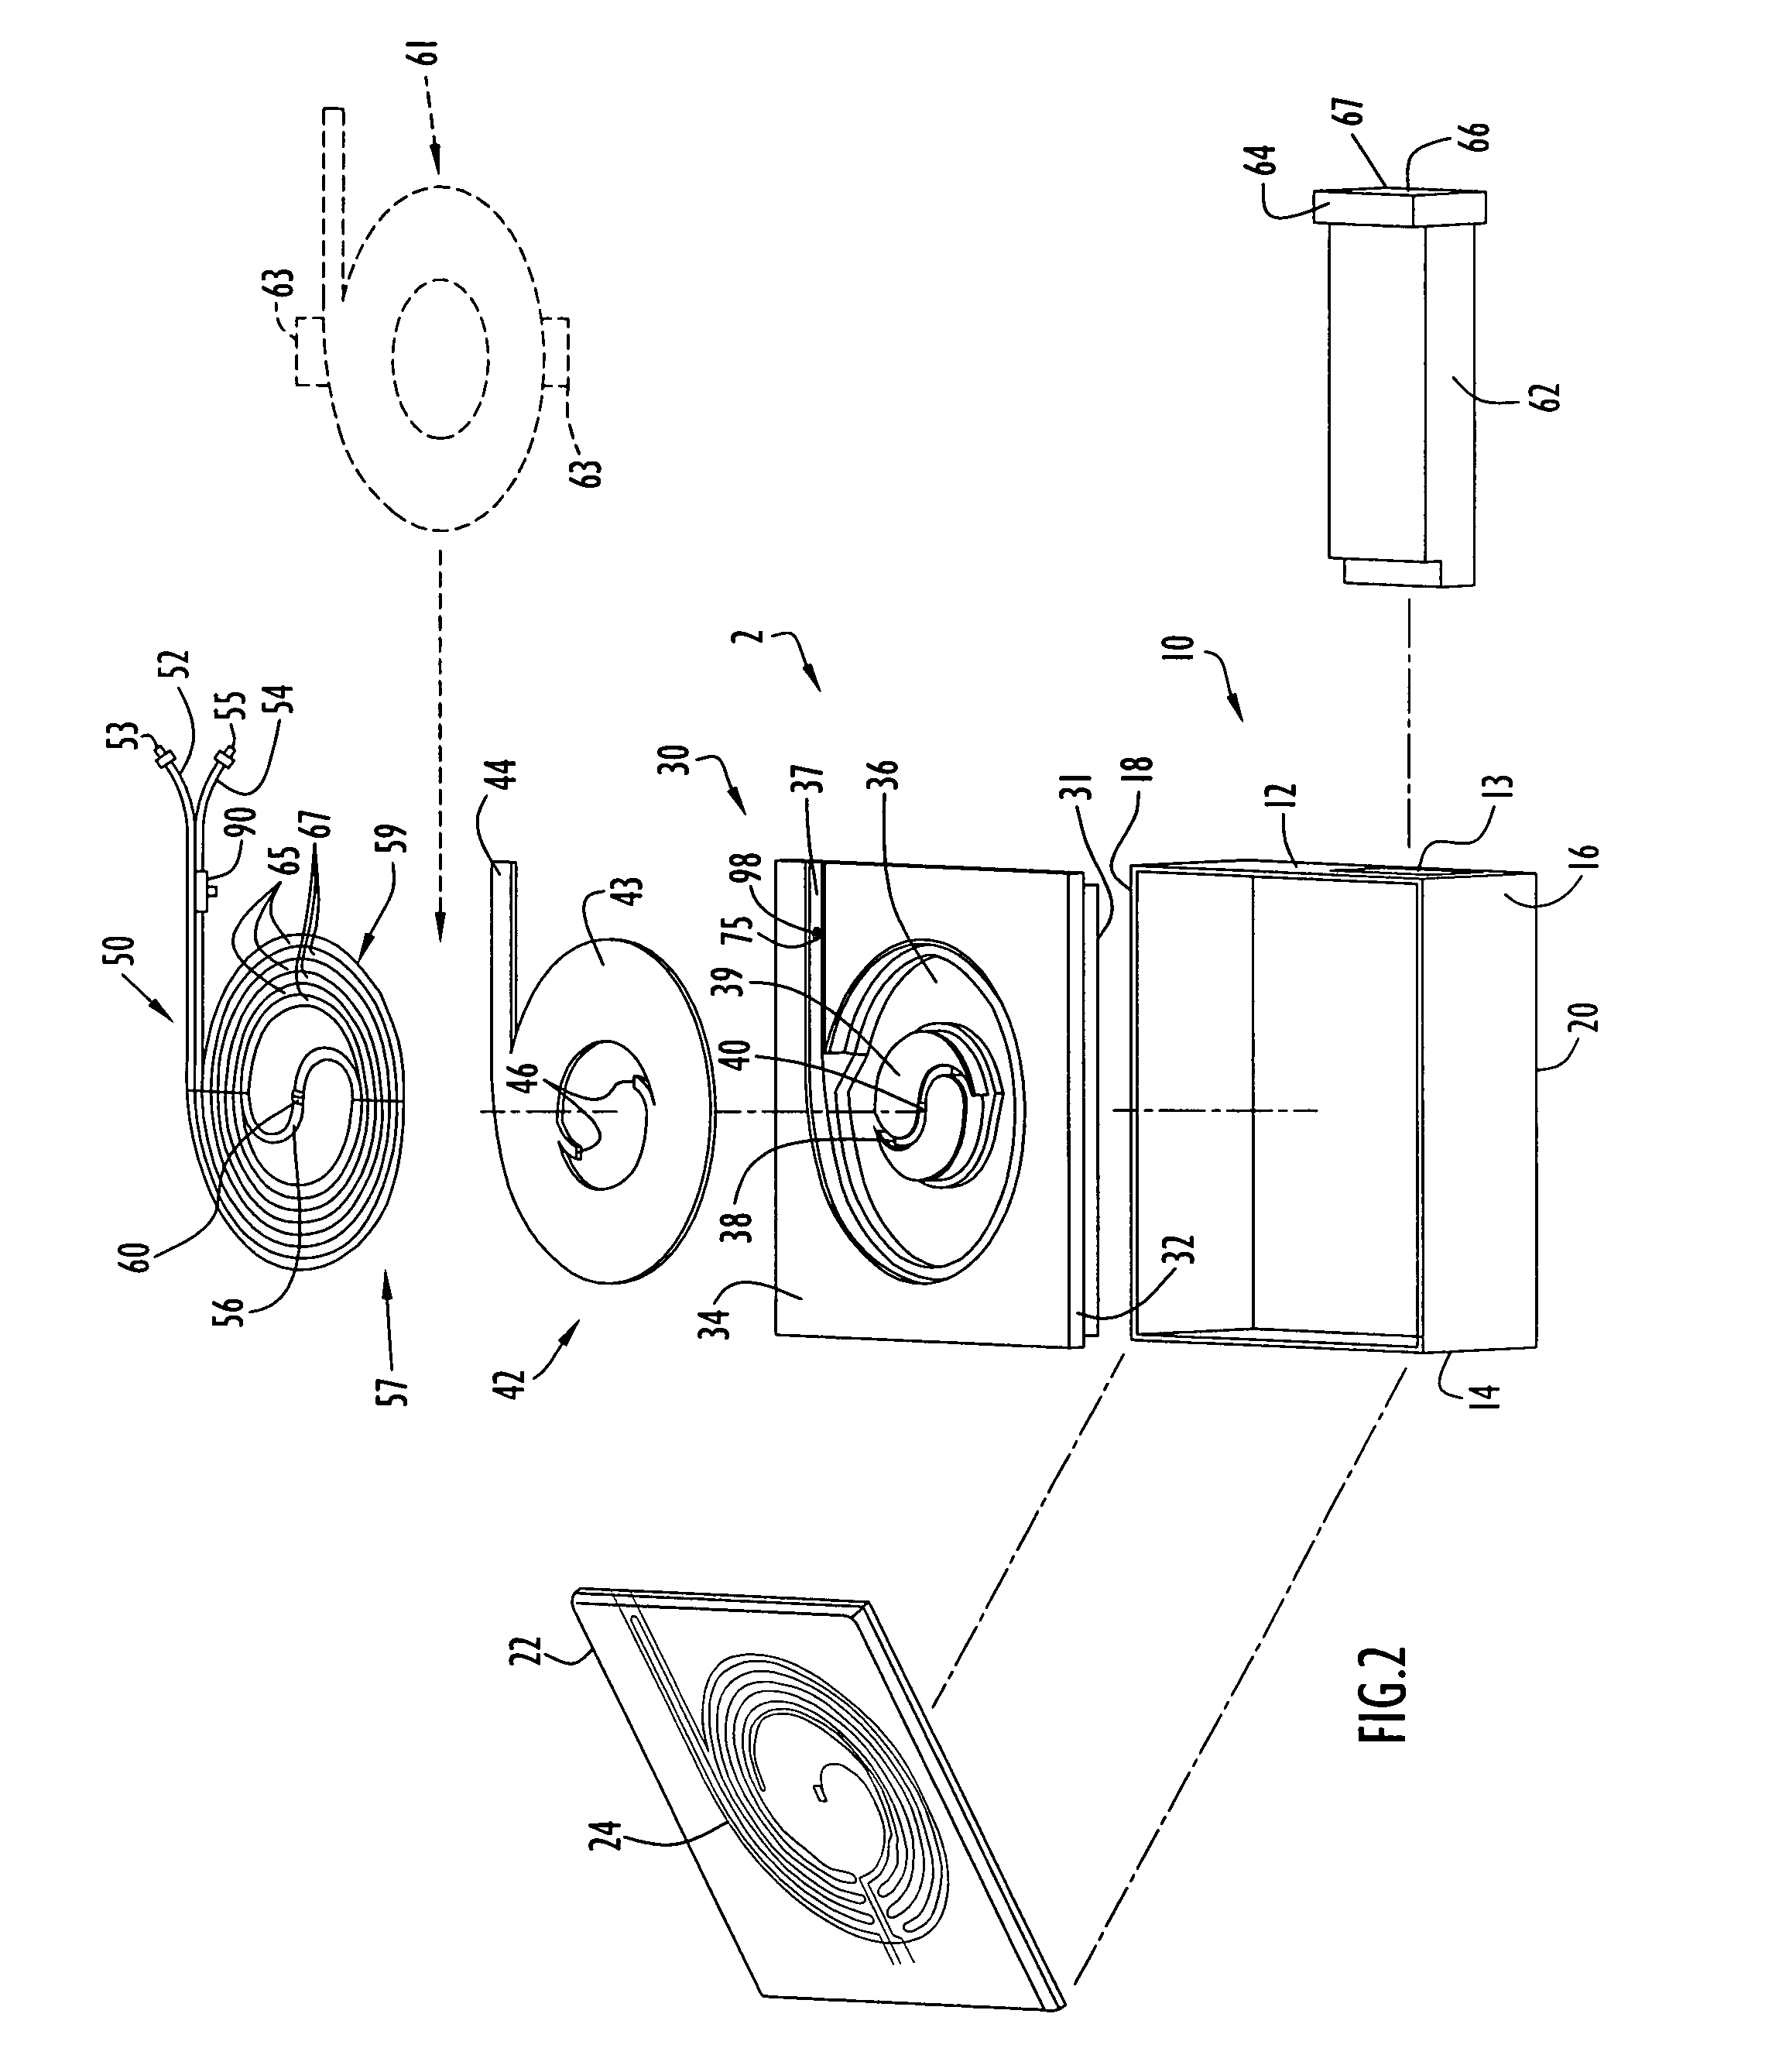 Method and apparatus for heating solutions within intravenous lines to desired temperatures during infusion